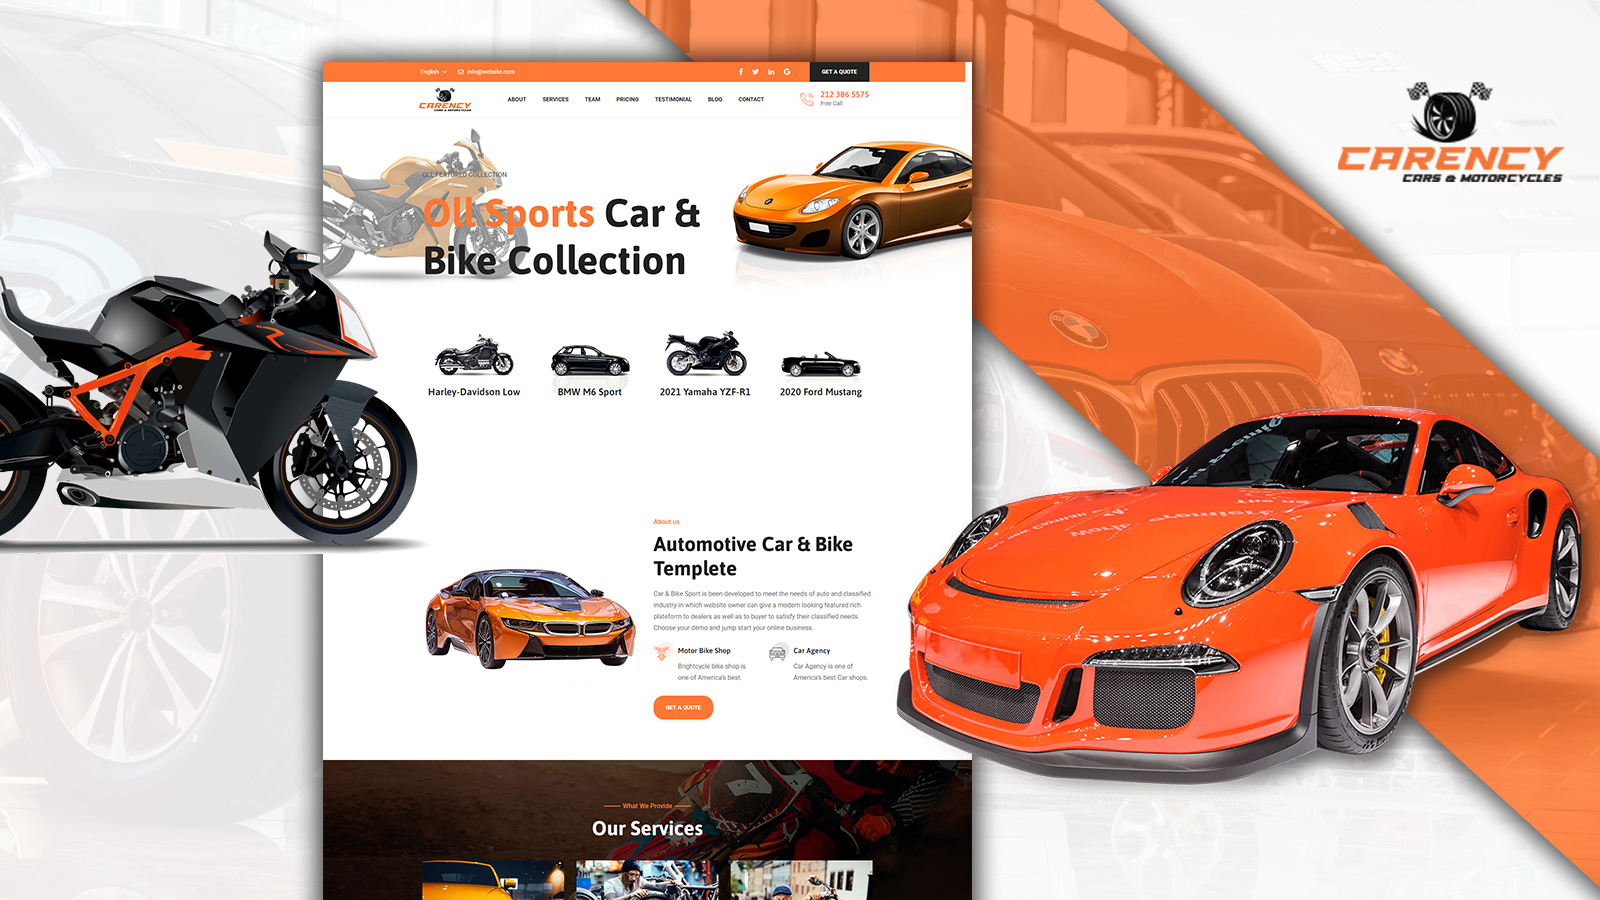 Powar-Carency Car And Automobile Showroom One Page WordPress Theme